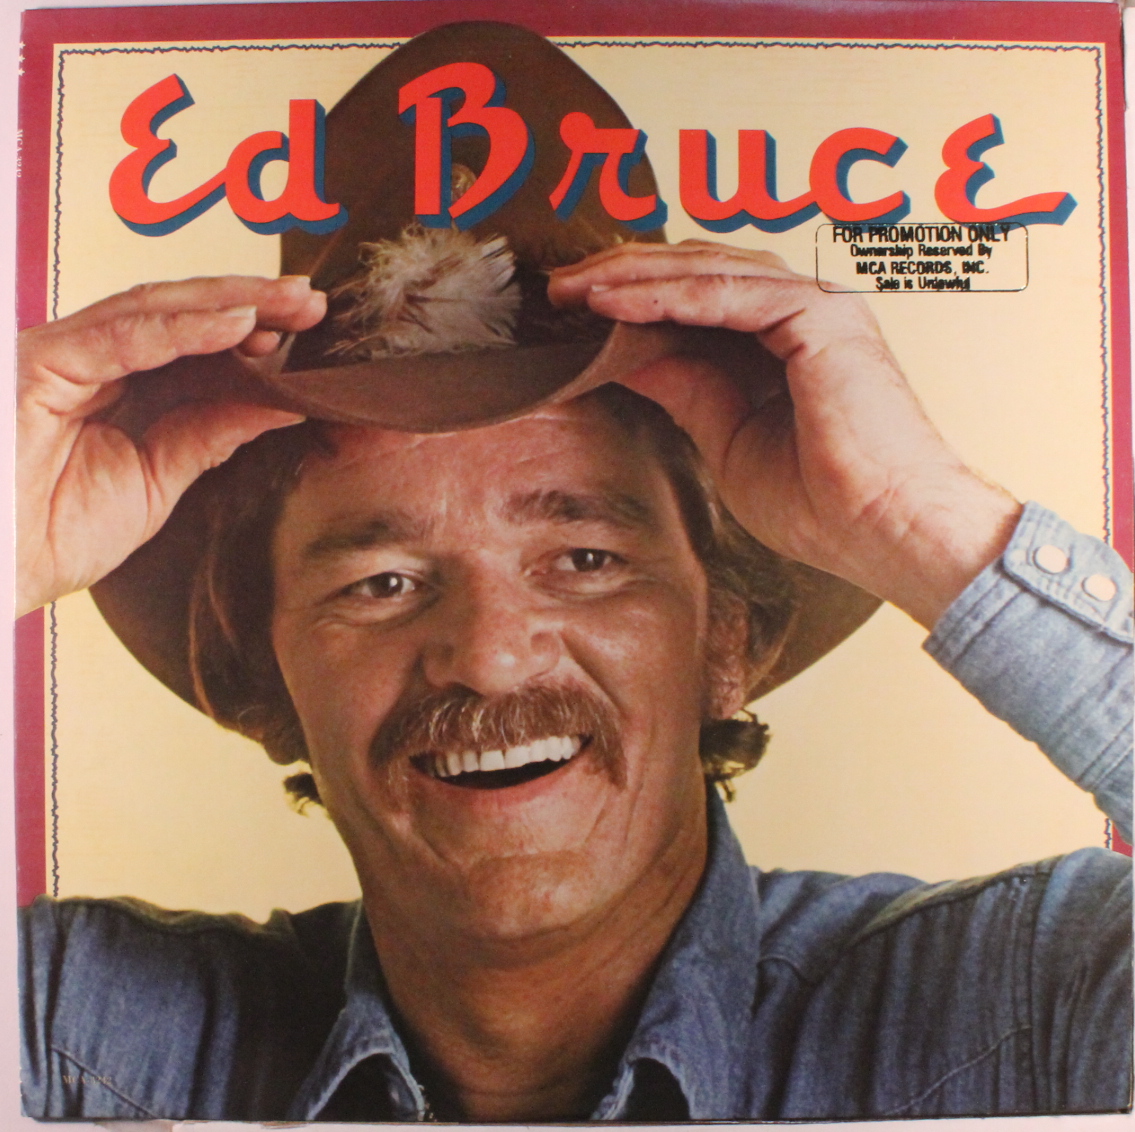 FROM THE VAULTS: Ed Bruce born 29 December 1939